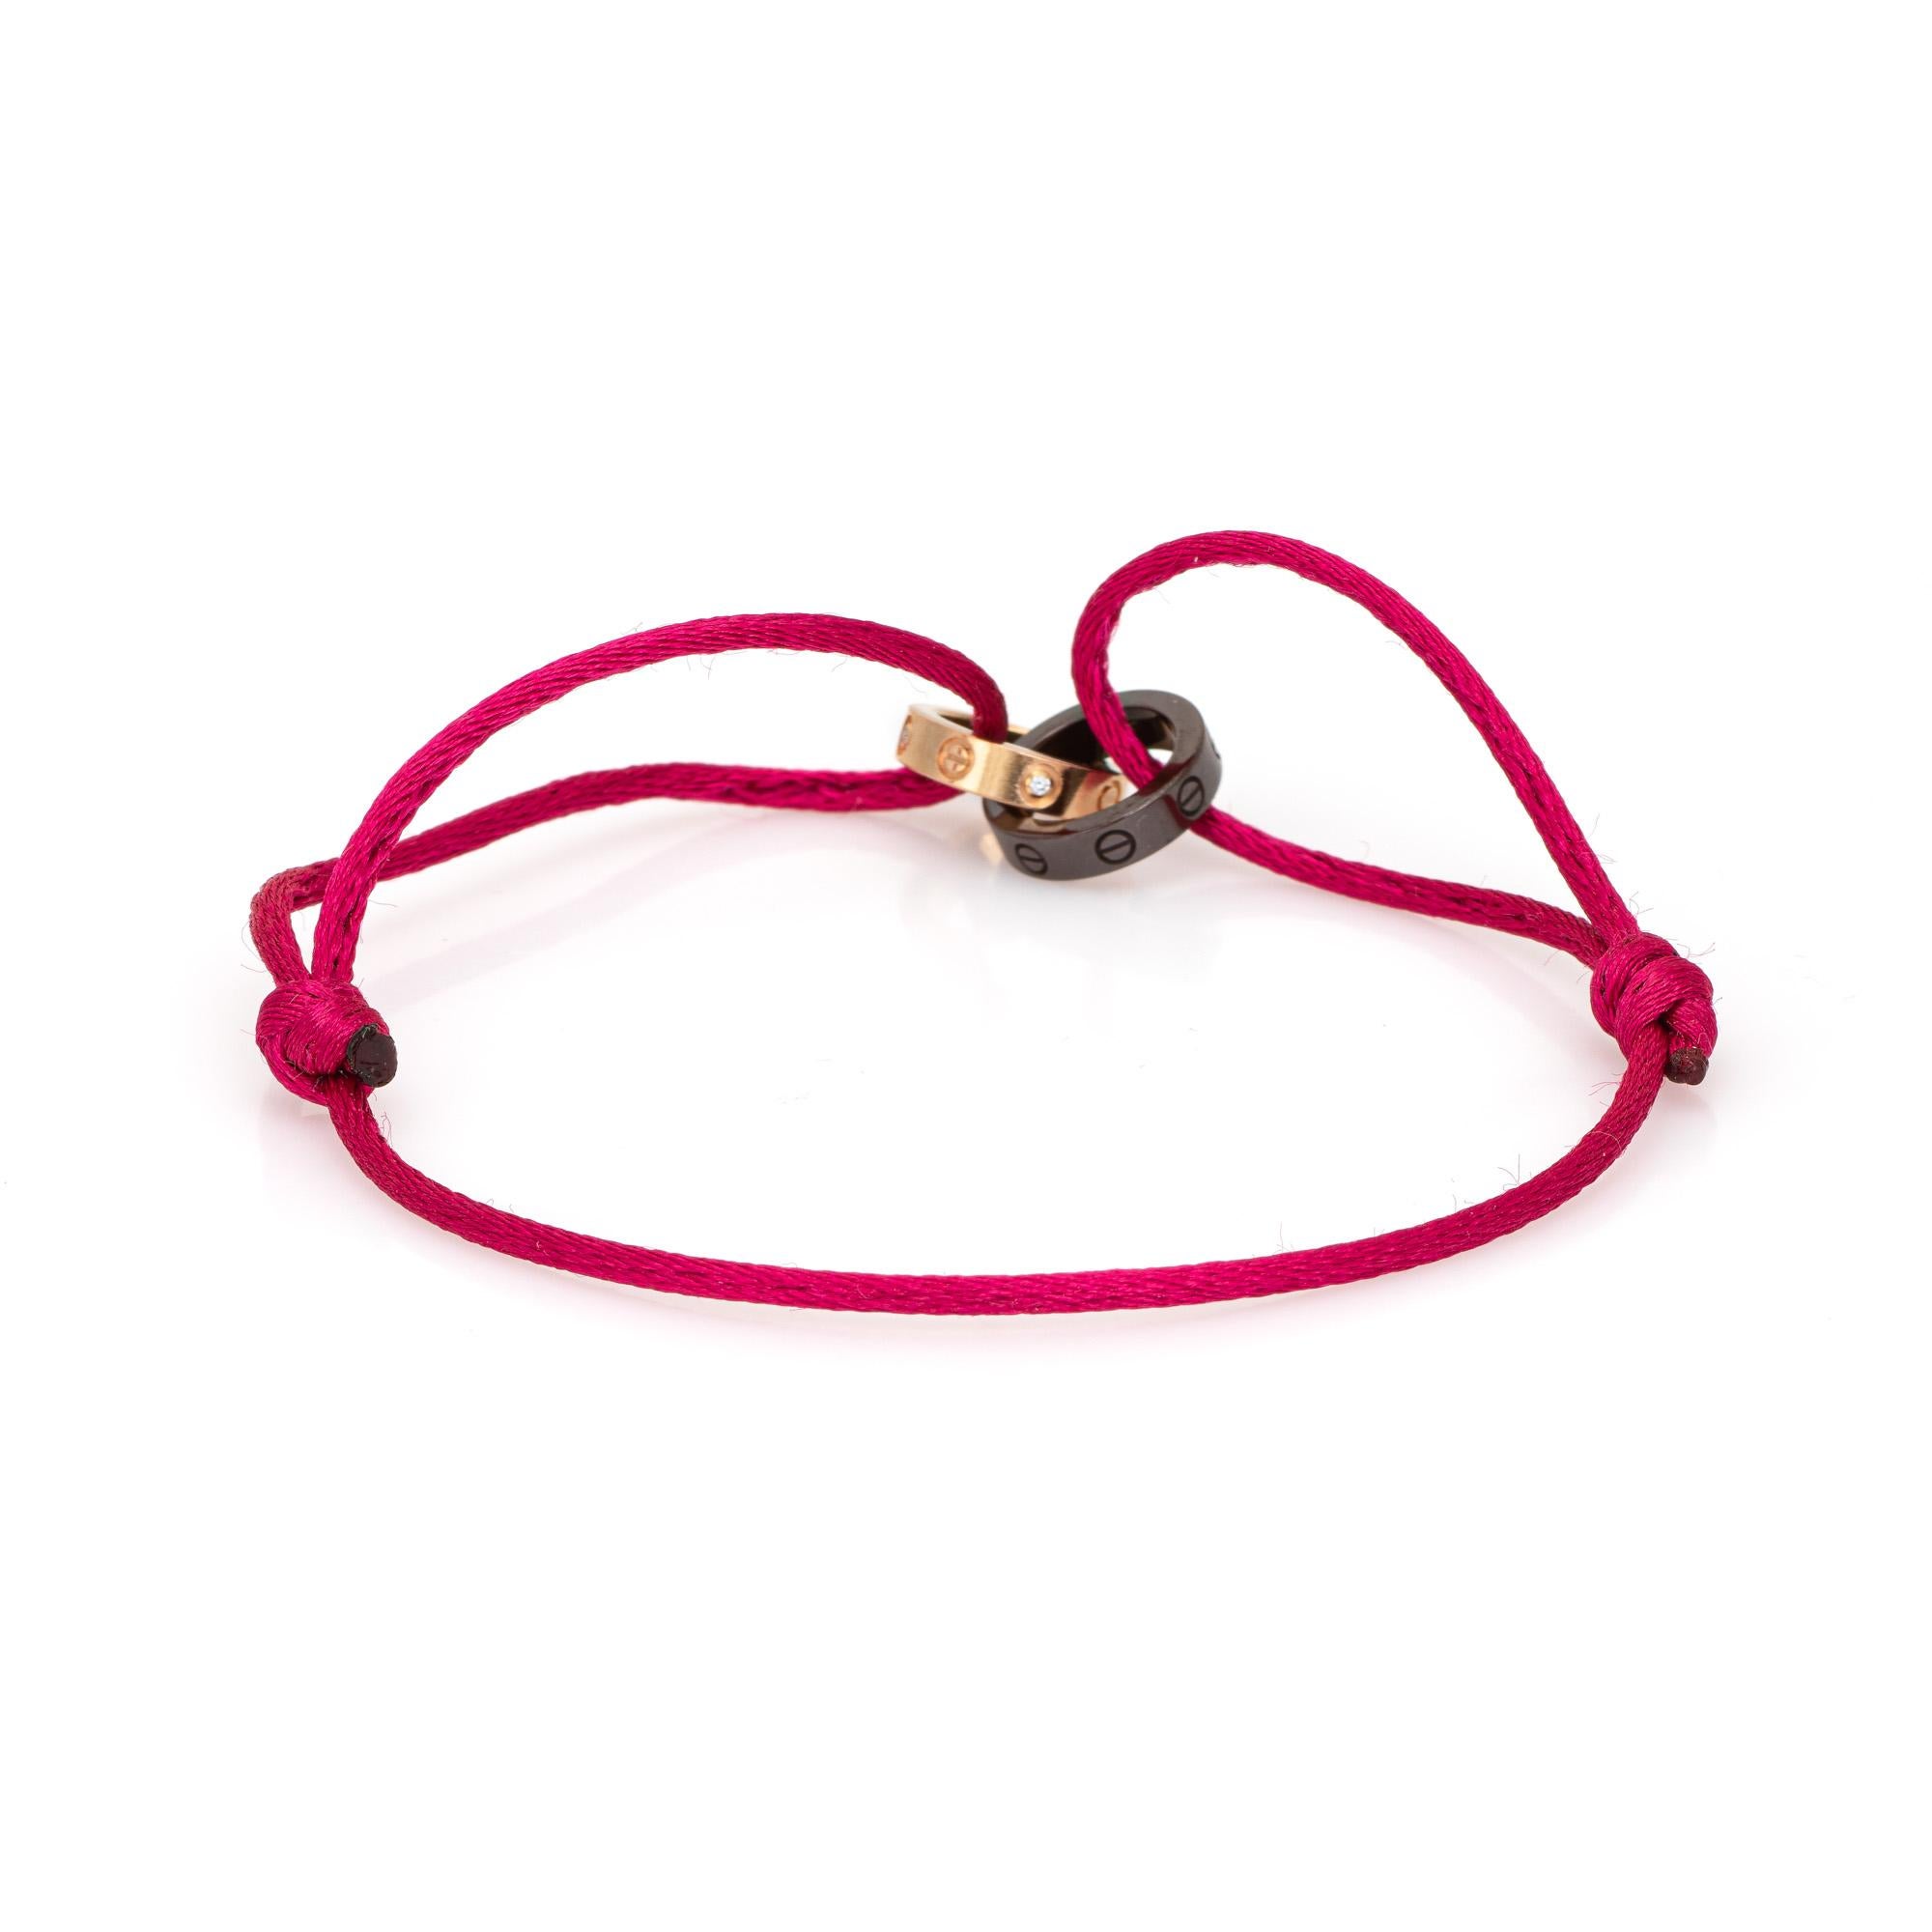 Estate Cartier LOVE charity bracelet crafted in 18 karat white gold.  

The out of production bracelet is a Cartier classic. Originally released in 2006, the Love Charity bracelet is fitted with a pink silk cord and 18k gold 4 diamond & ceramic